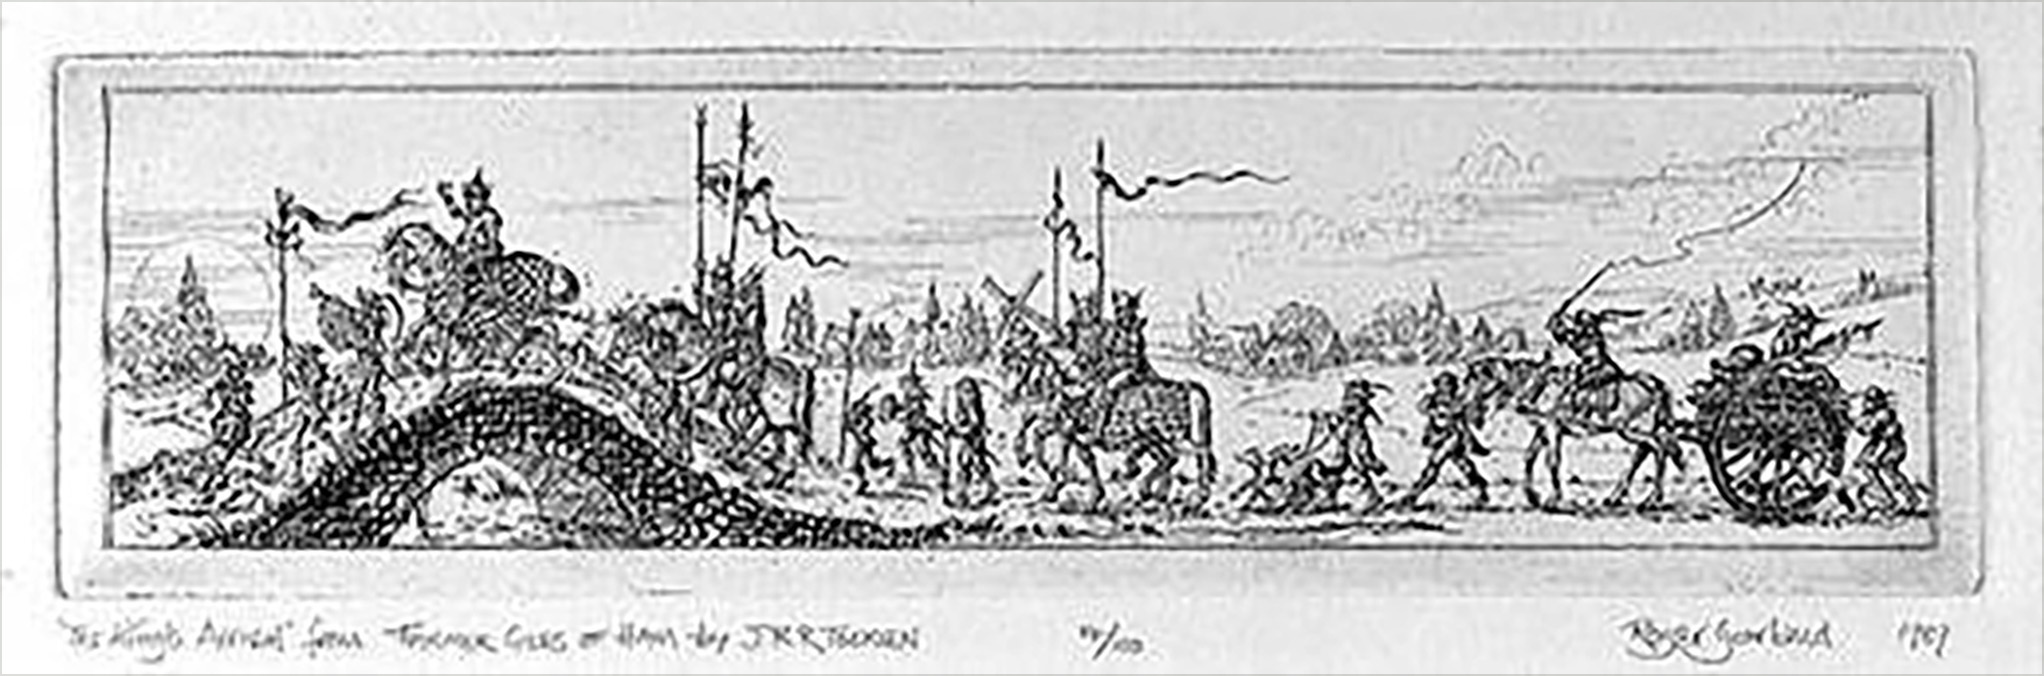 <titletext>

<strong>46. The King’s Arrival from Farmer Giles of Ham</strong>

</titletext>

<br/><br/>

Copper etching, 1989, image size 75 x 274 mm.<span class="ngViews">3 views</span>